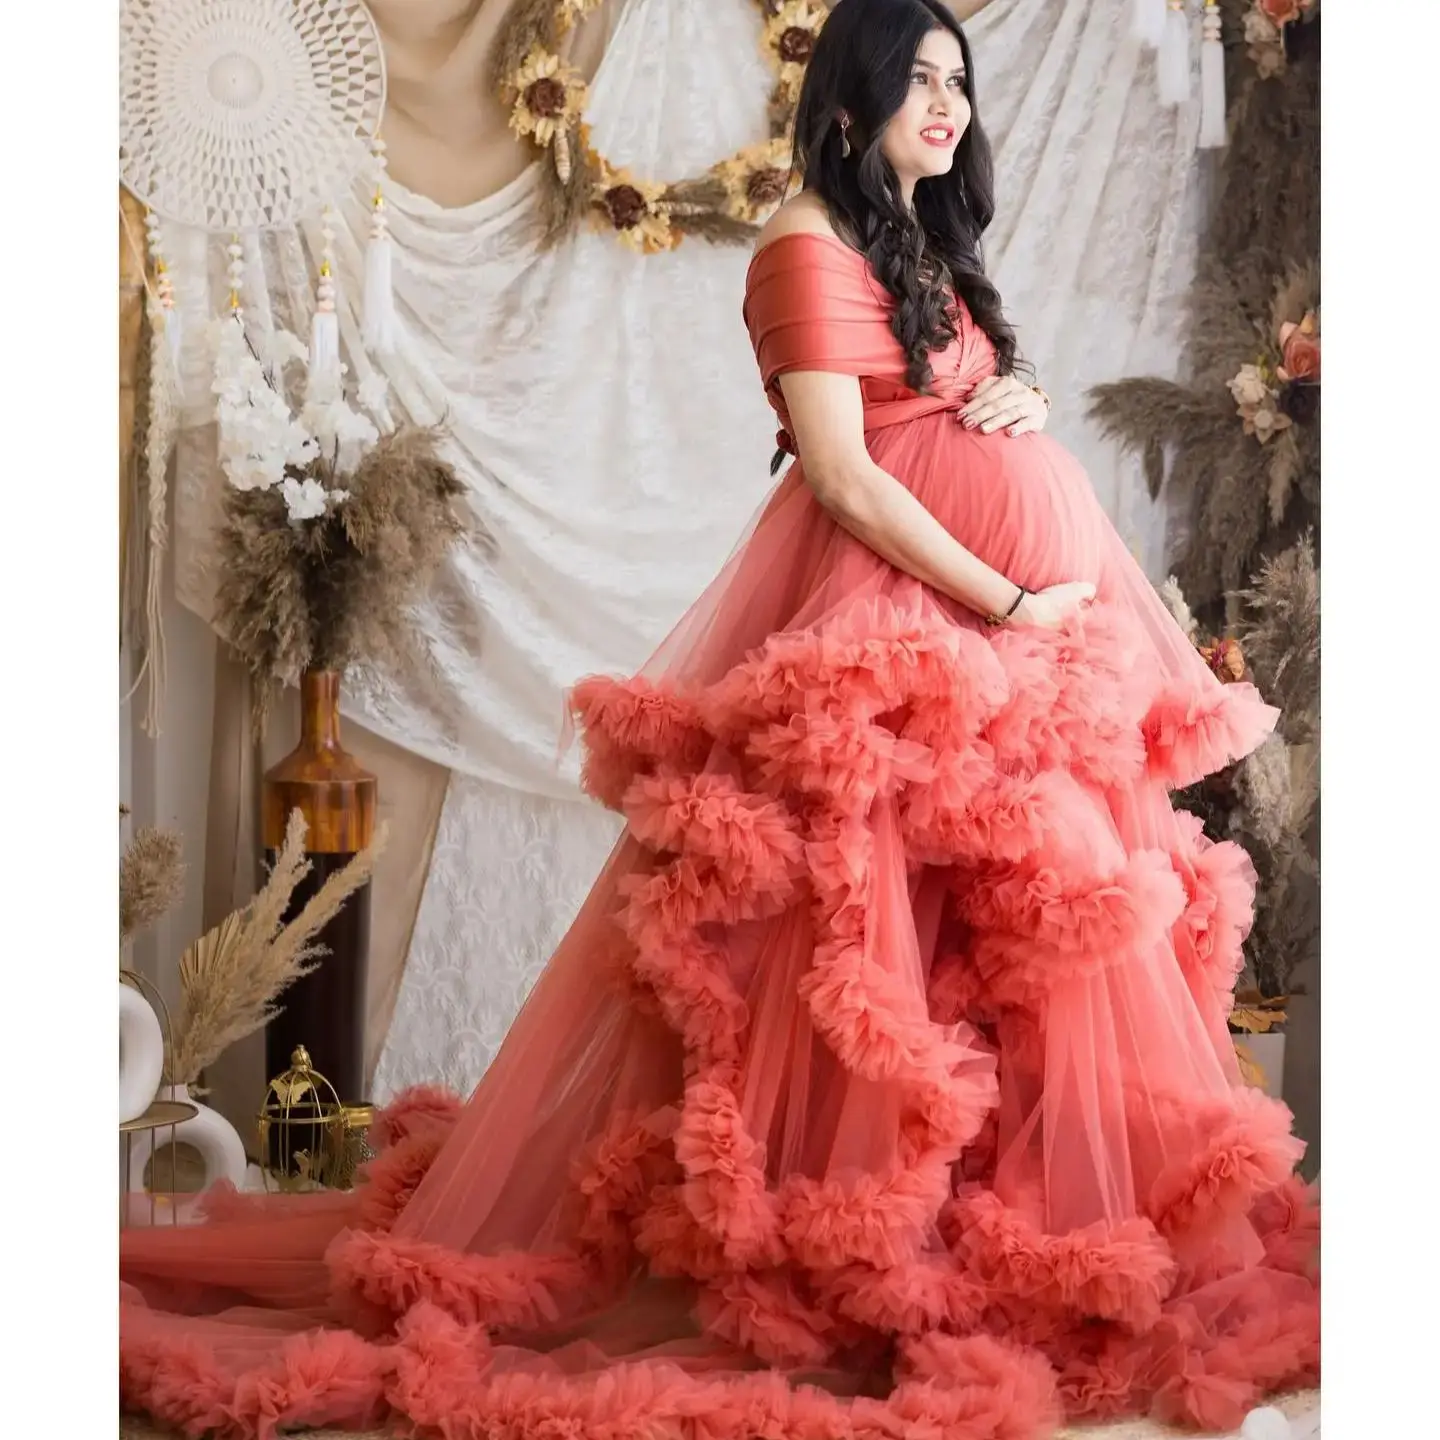 

Pink Tulle Maternity Dresses for Photo Shoot Ruched Baby Shower For Women Ruffles Robes Pregnancy Dress Vestido Sweep Train